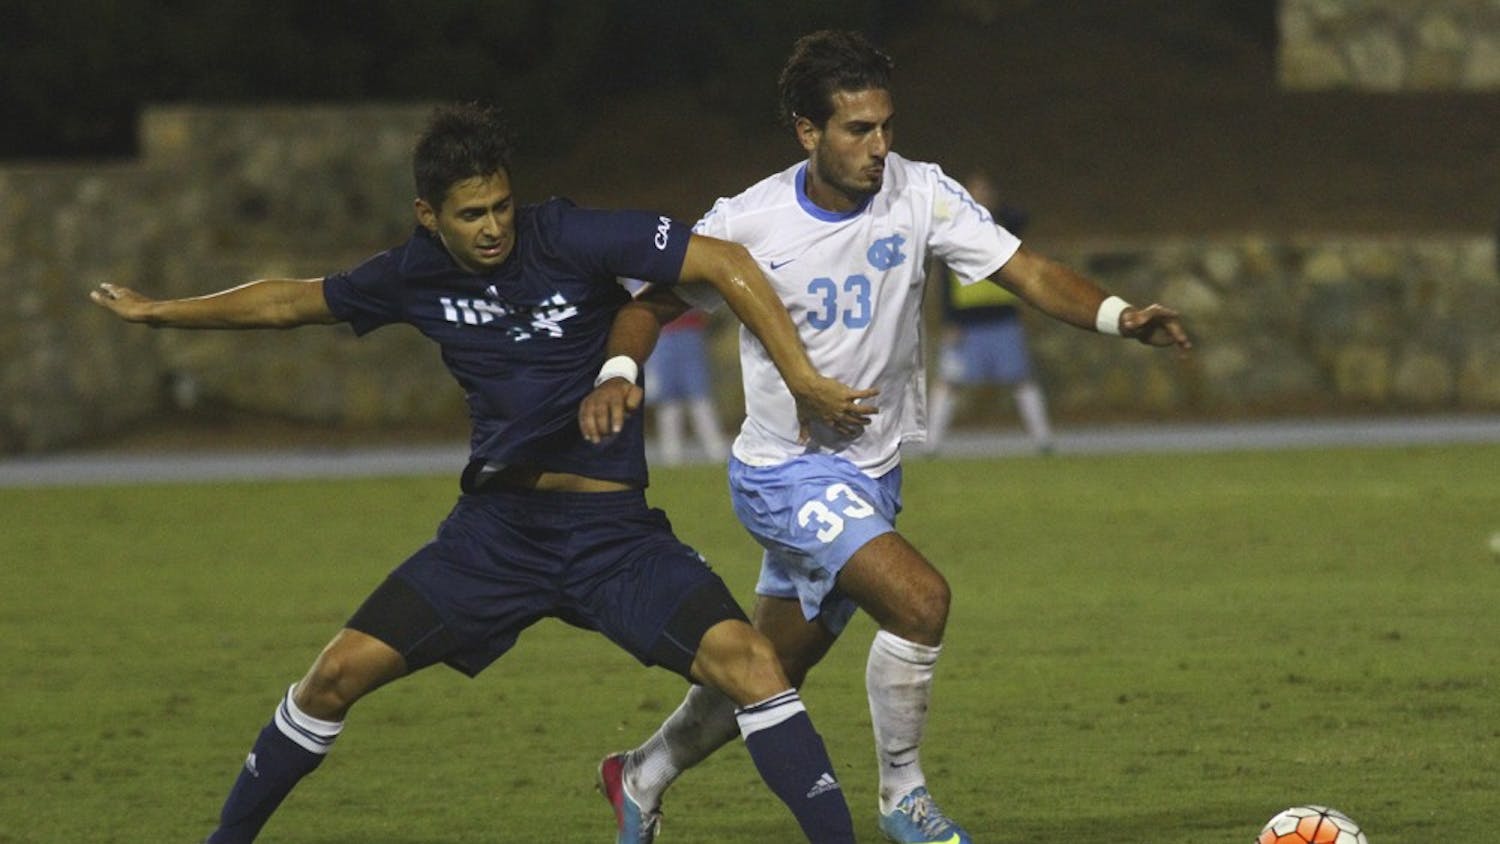 UNC Men's Soccer defeated UNC Wilmington by a score of 3-0 Tuesday night.